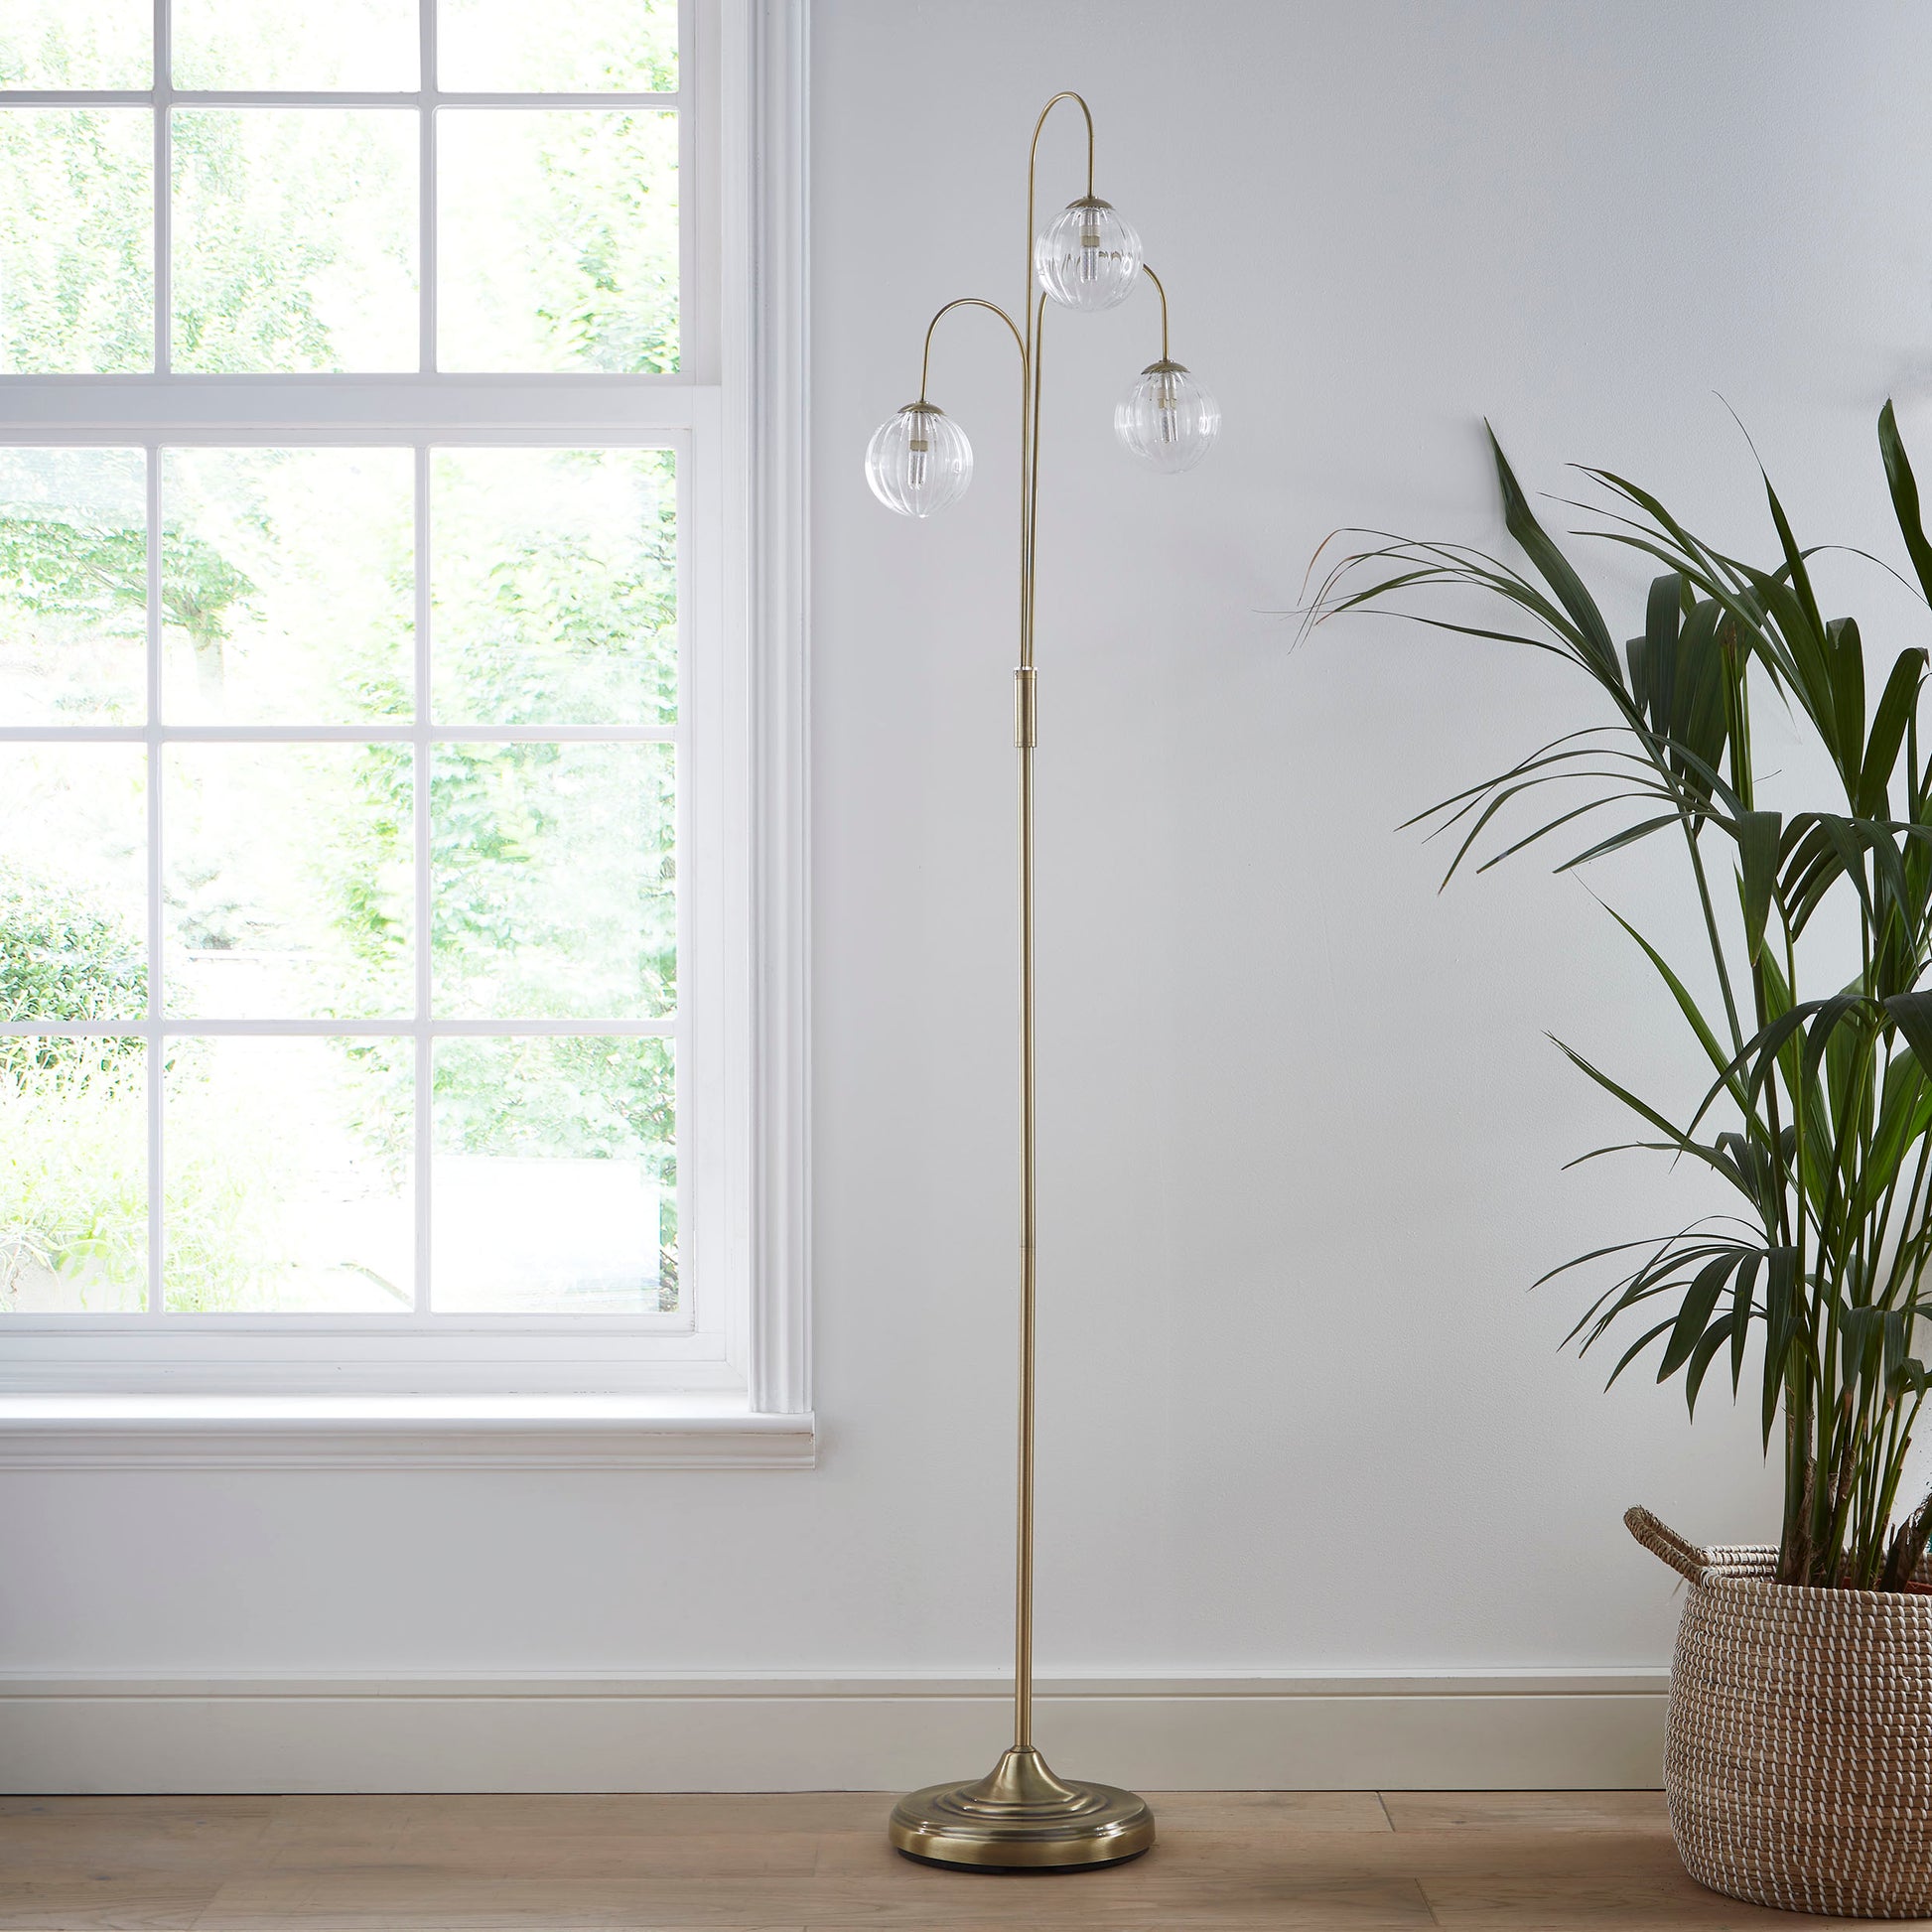 New Haven matching Table and Floor Lamp with Glass Globe Shades (sold separately)